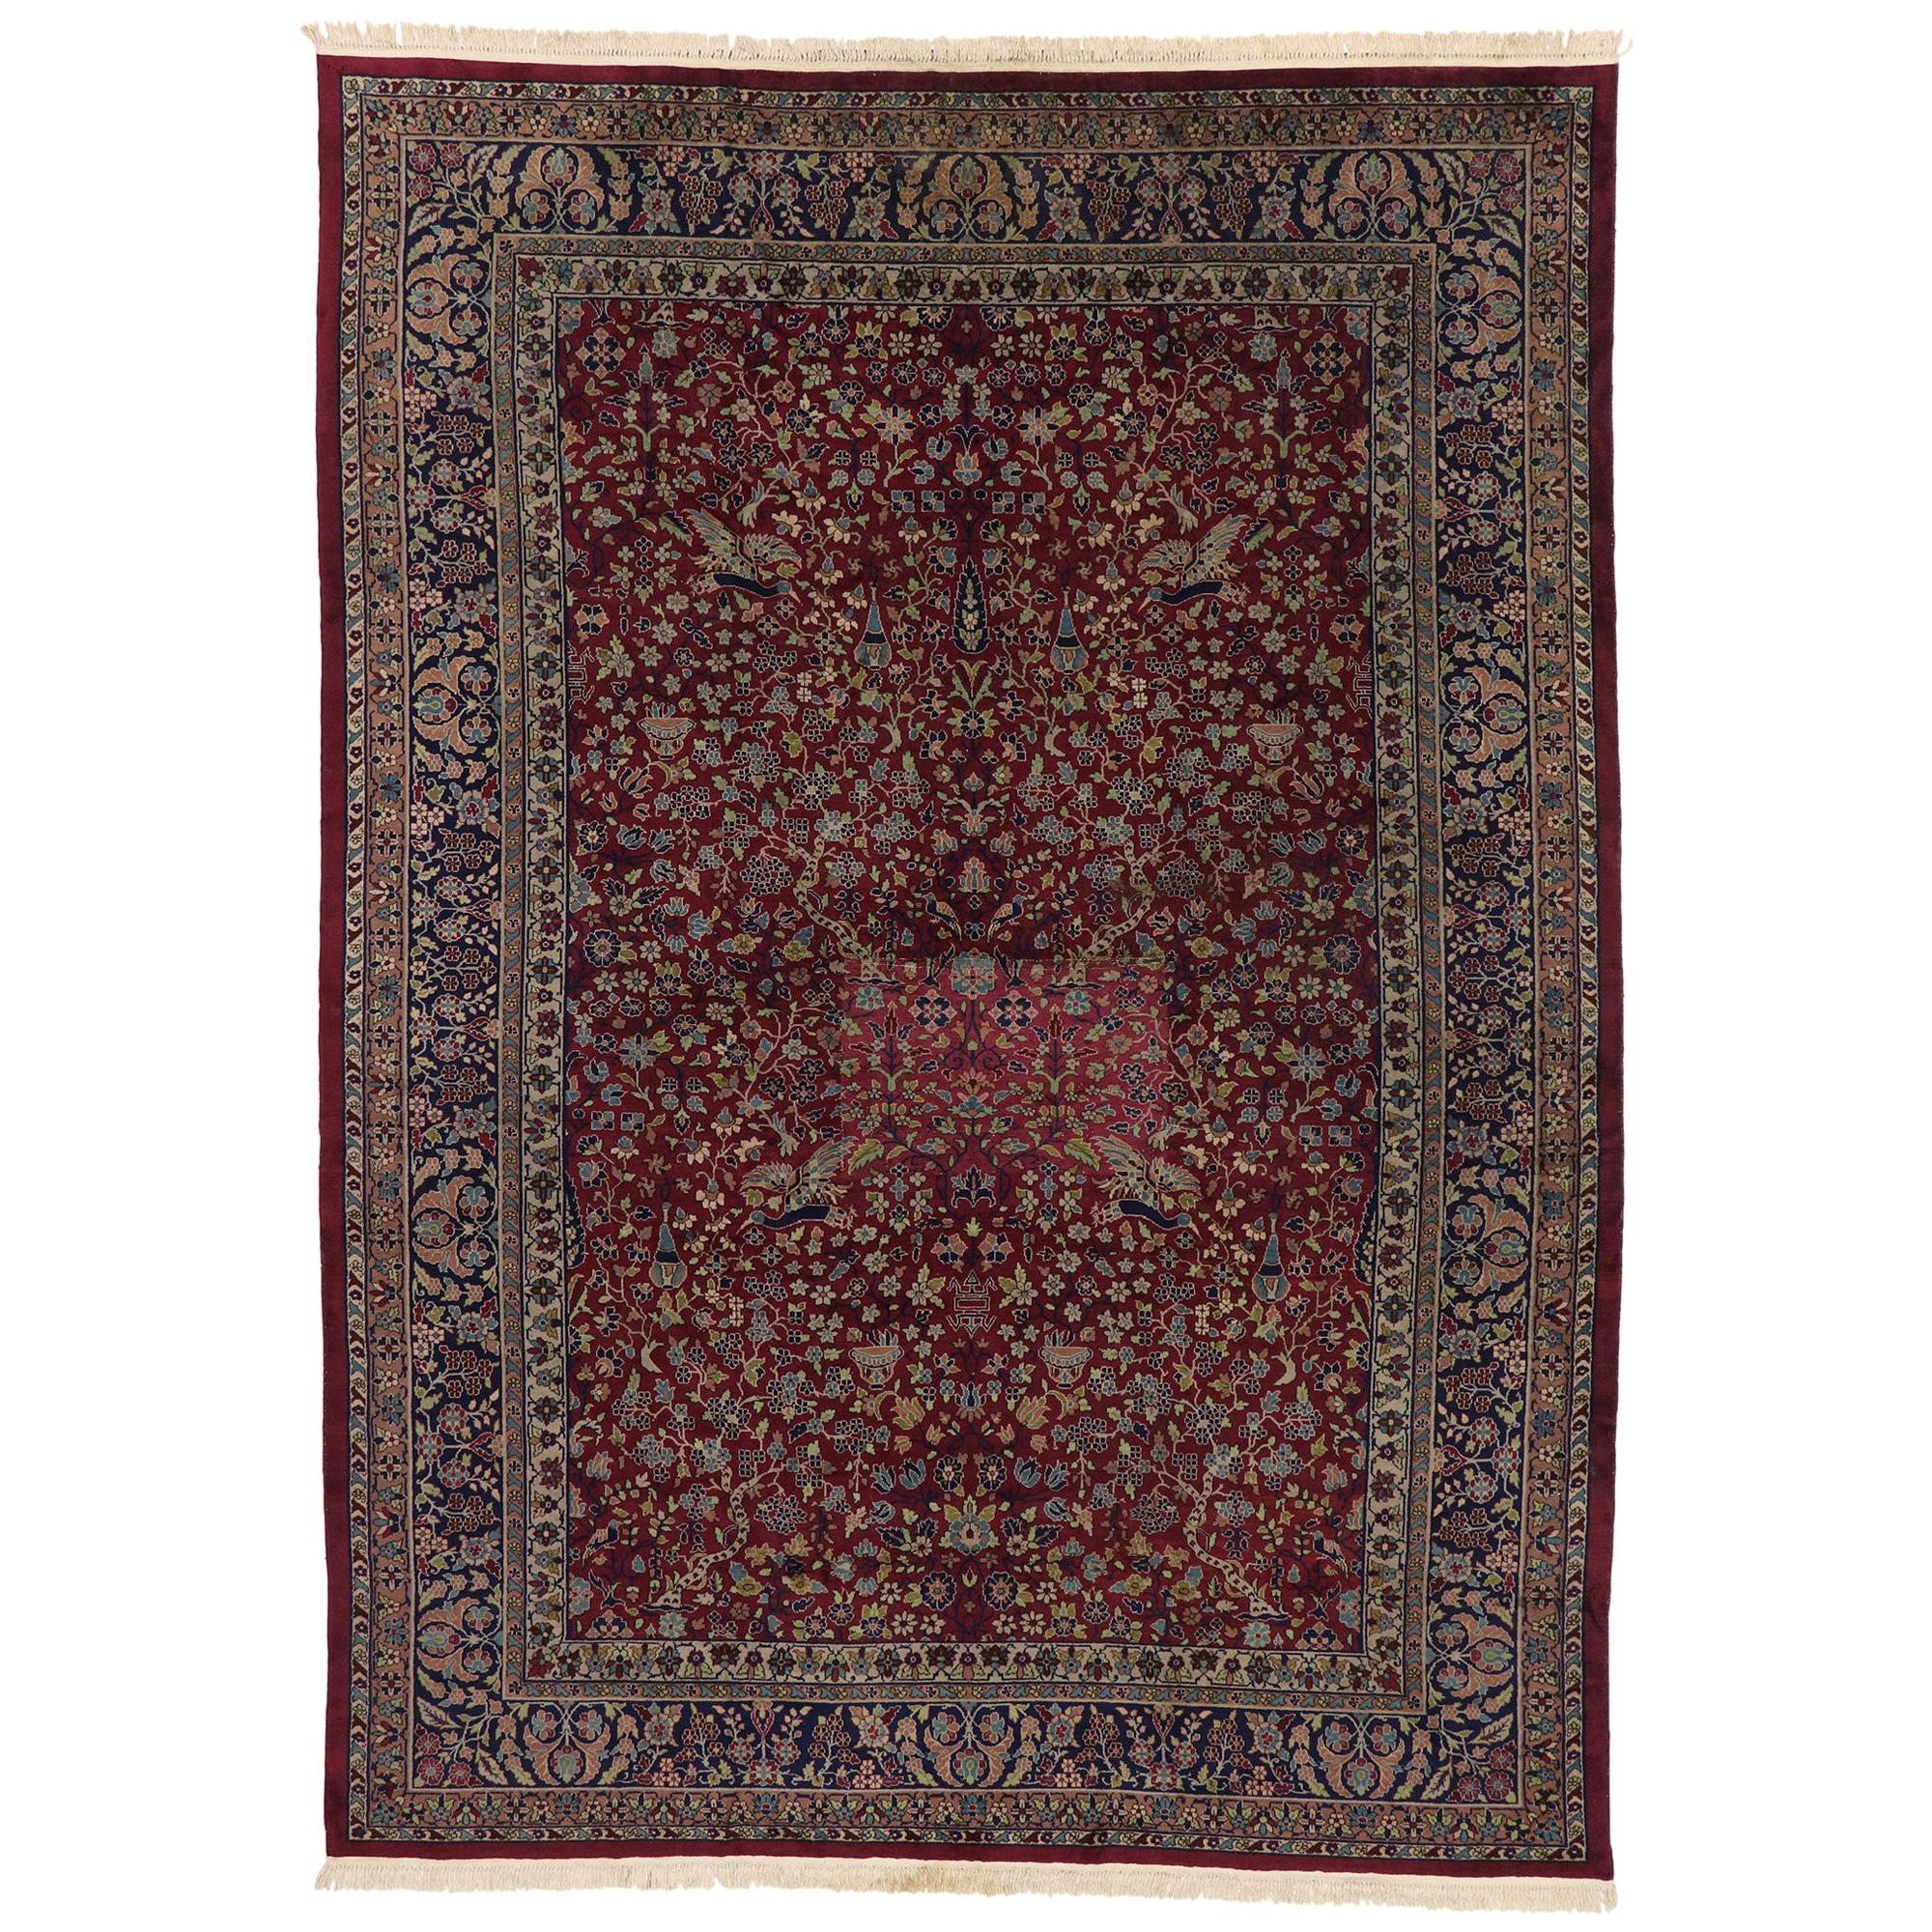 Antique Indian Agra Rug with Victorian Renaissance Style